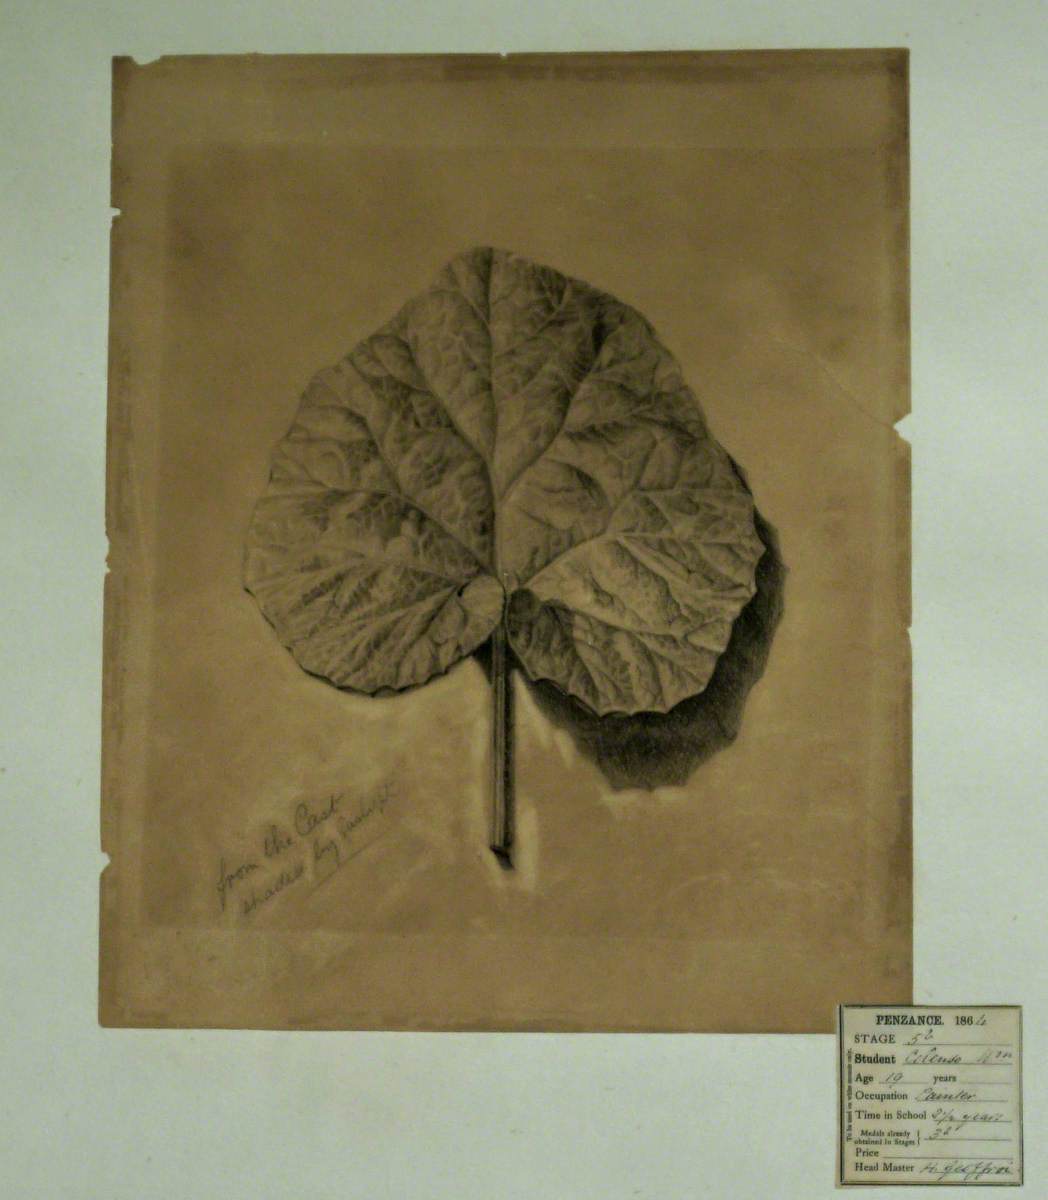 Leaf from Cast Shaded by Gas Light